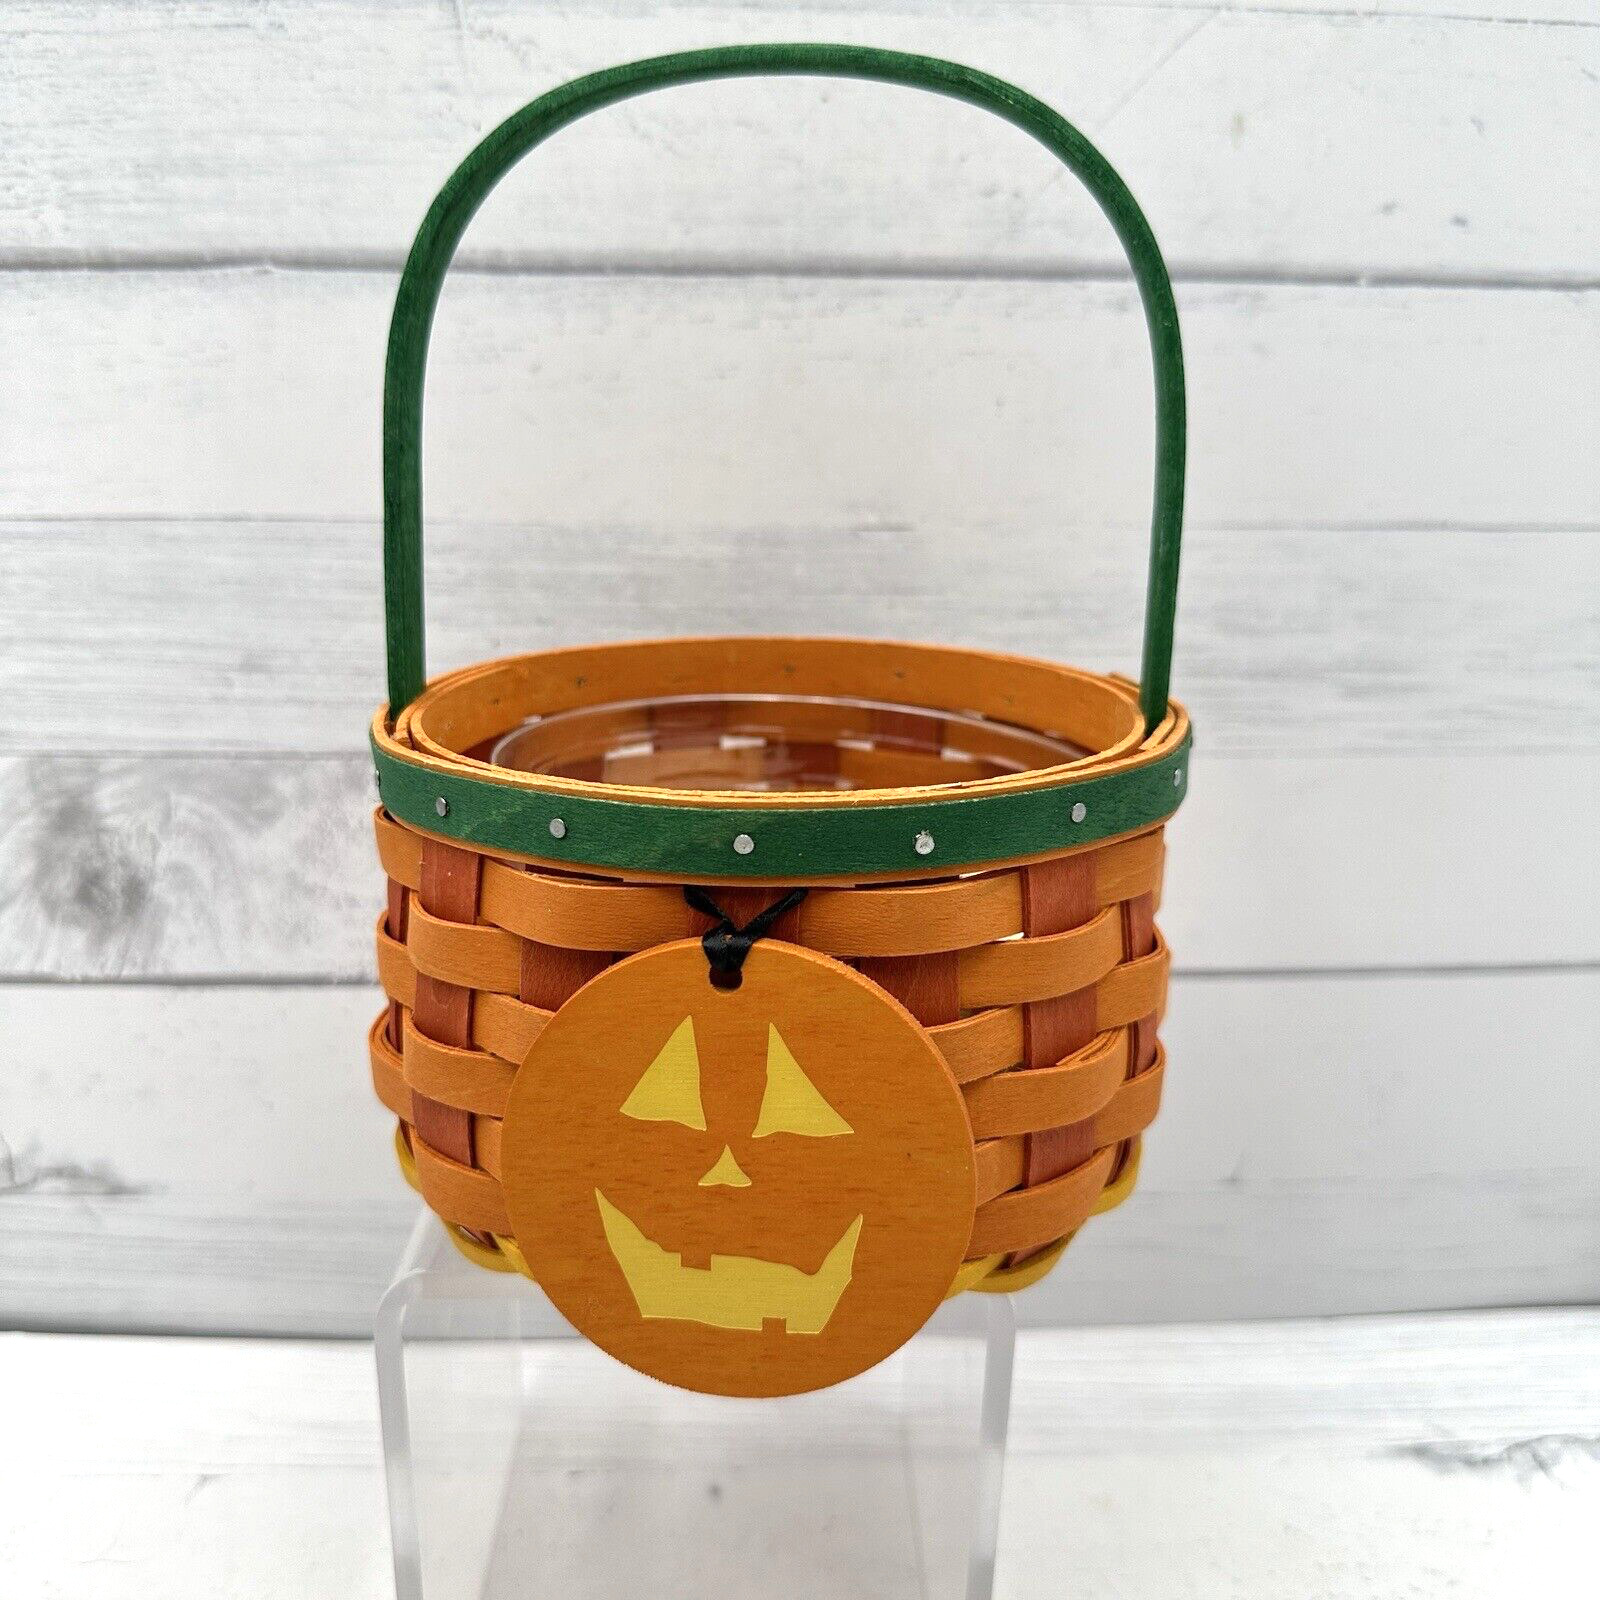 2015 Longaberger Halloween Pumpkin Ghoulie Basket and Protector and Tie On